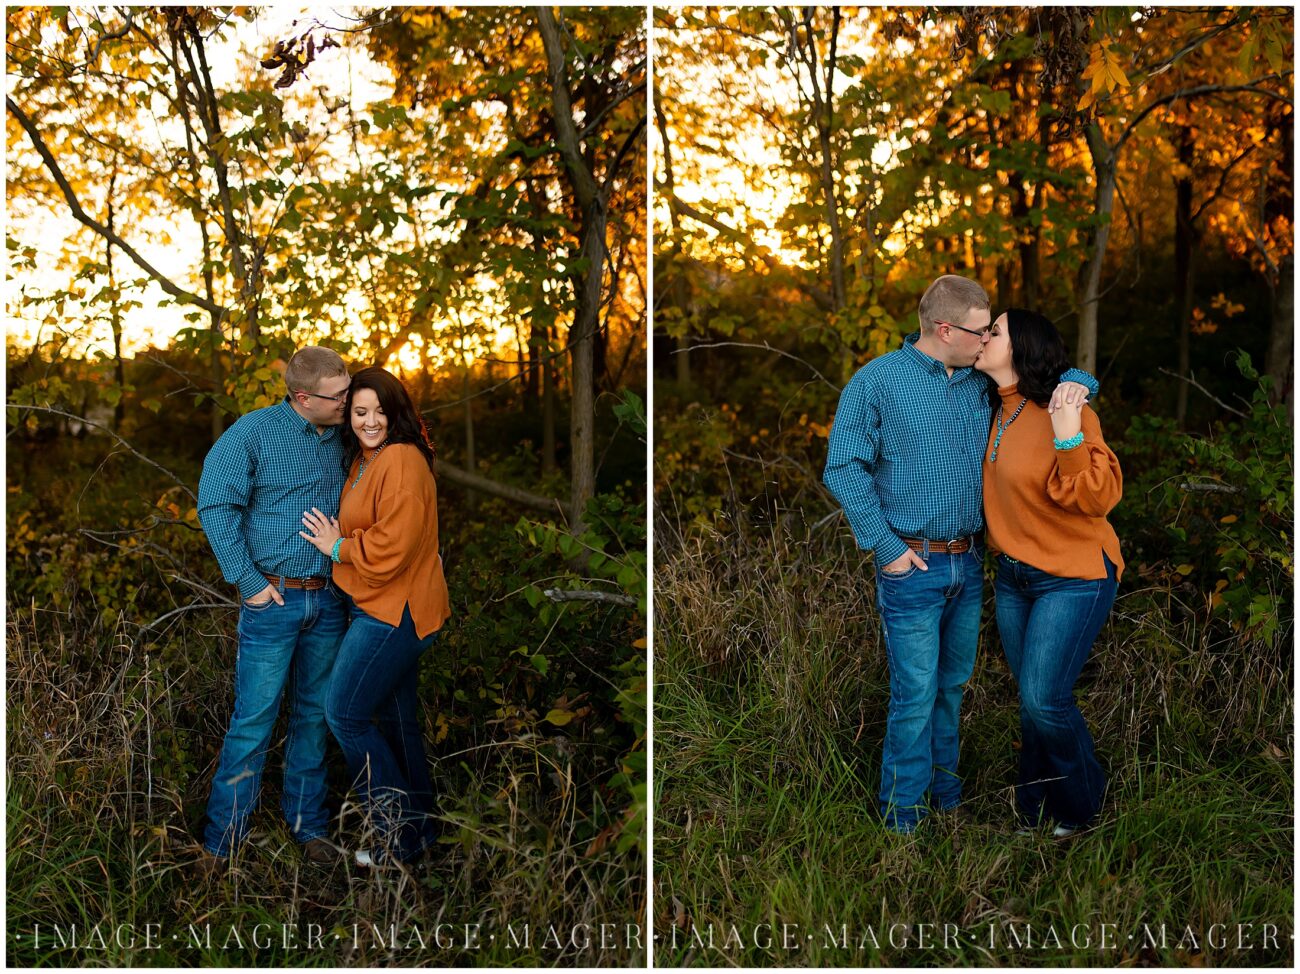 turquois and orange themed proposal photos